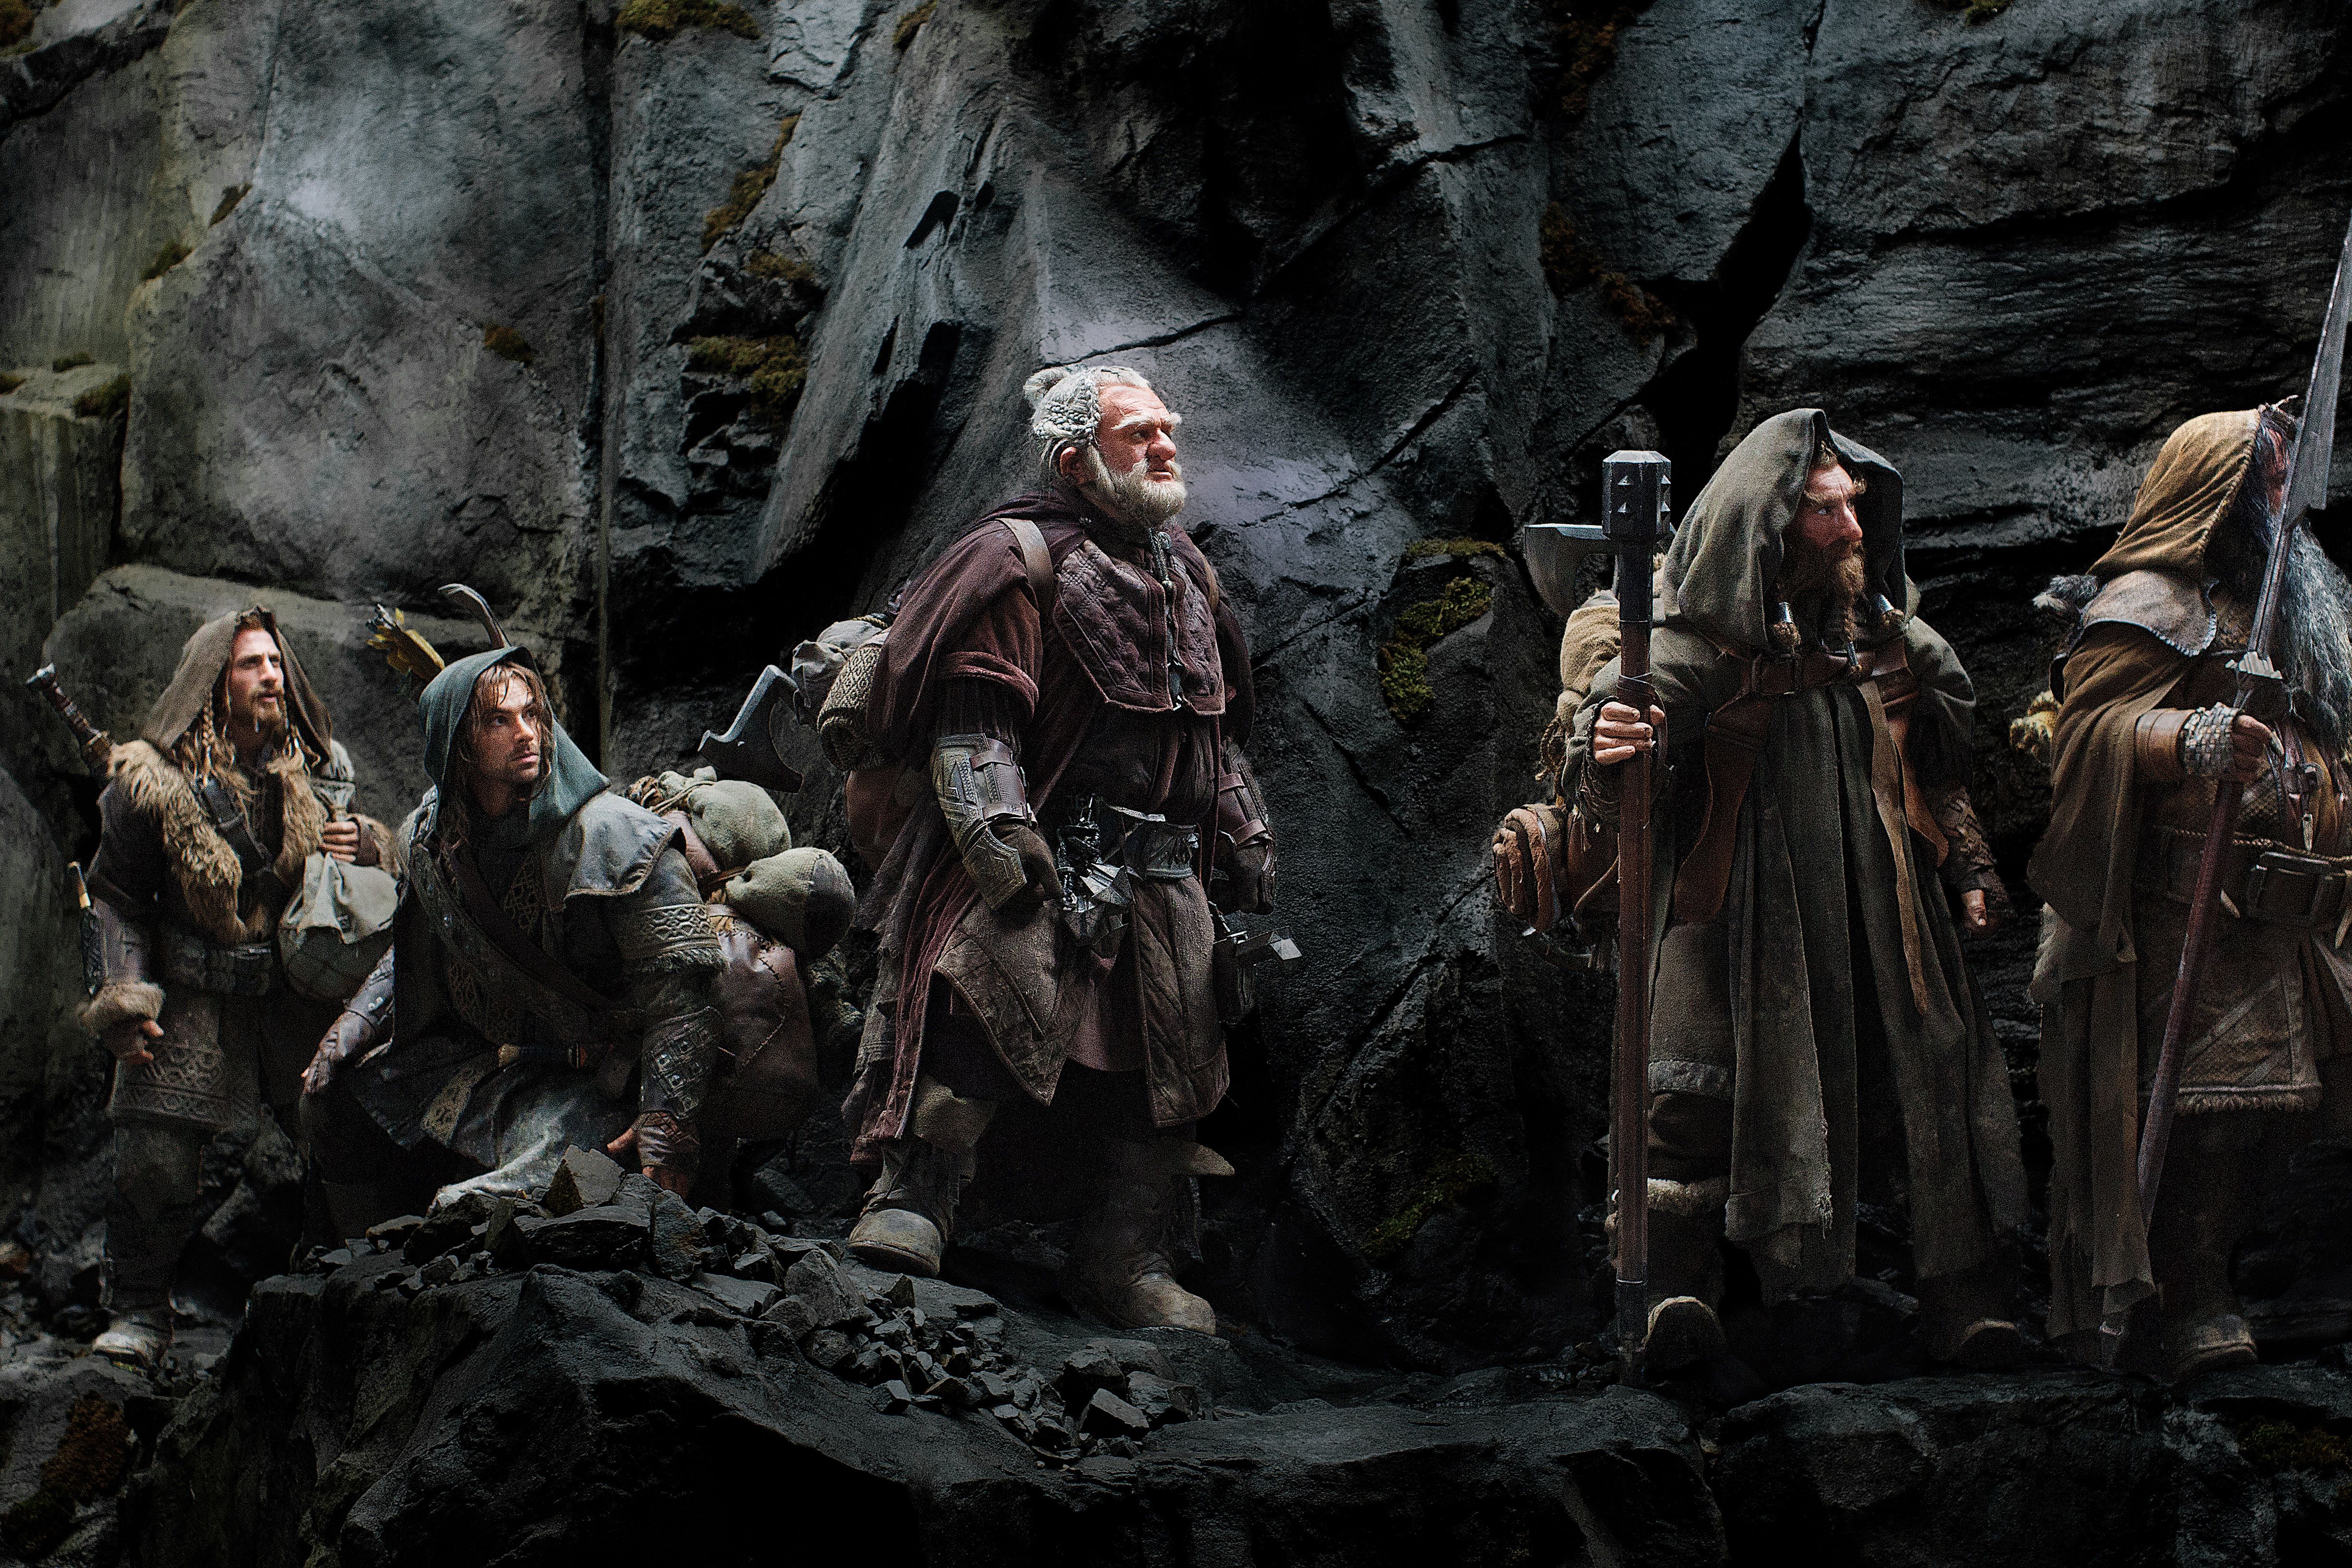 The Hobbit: An Unexpected Journery